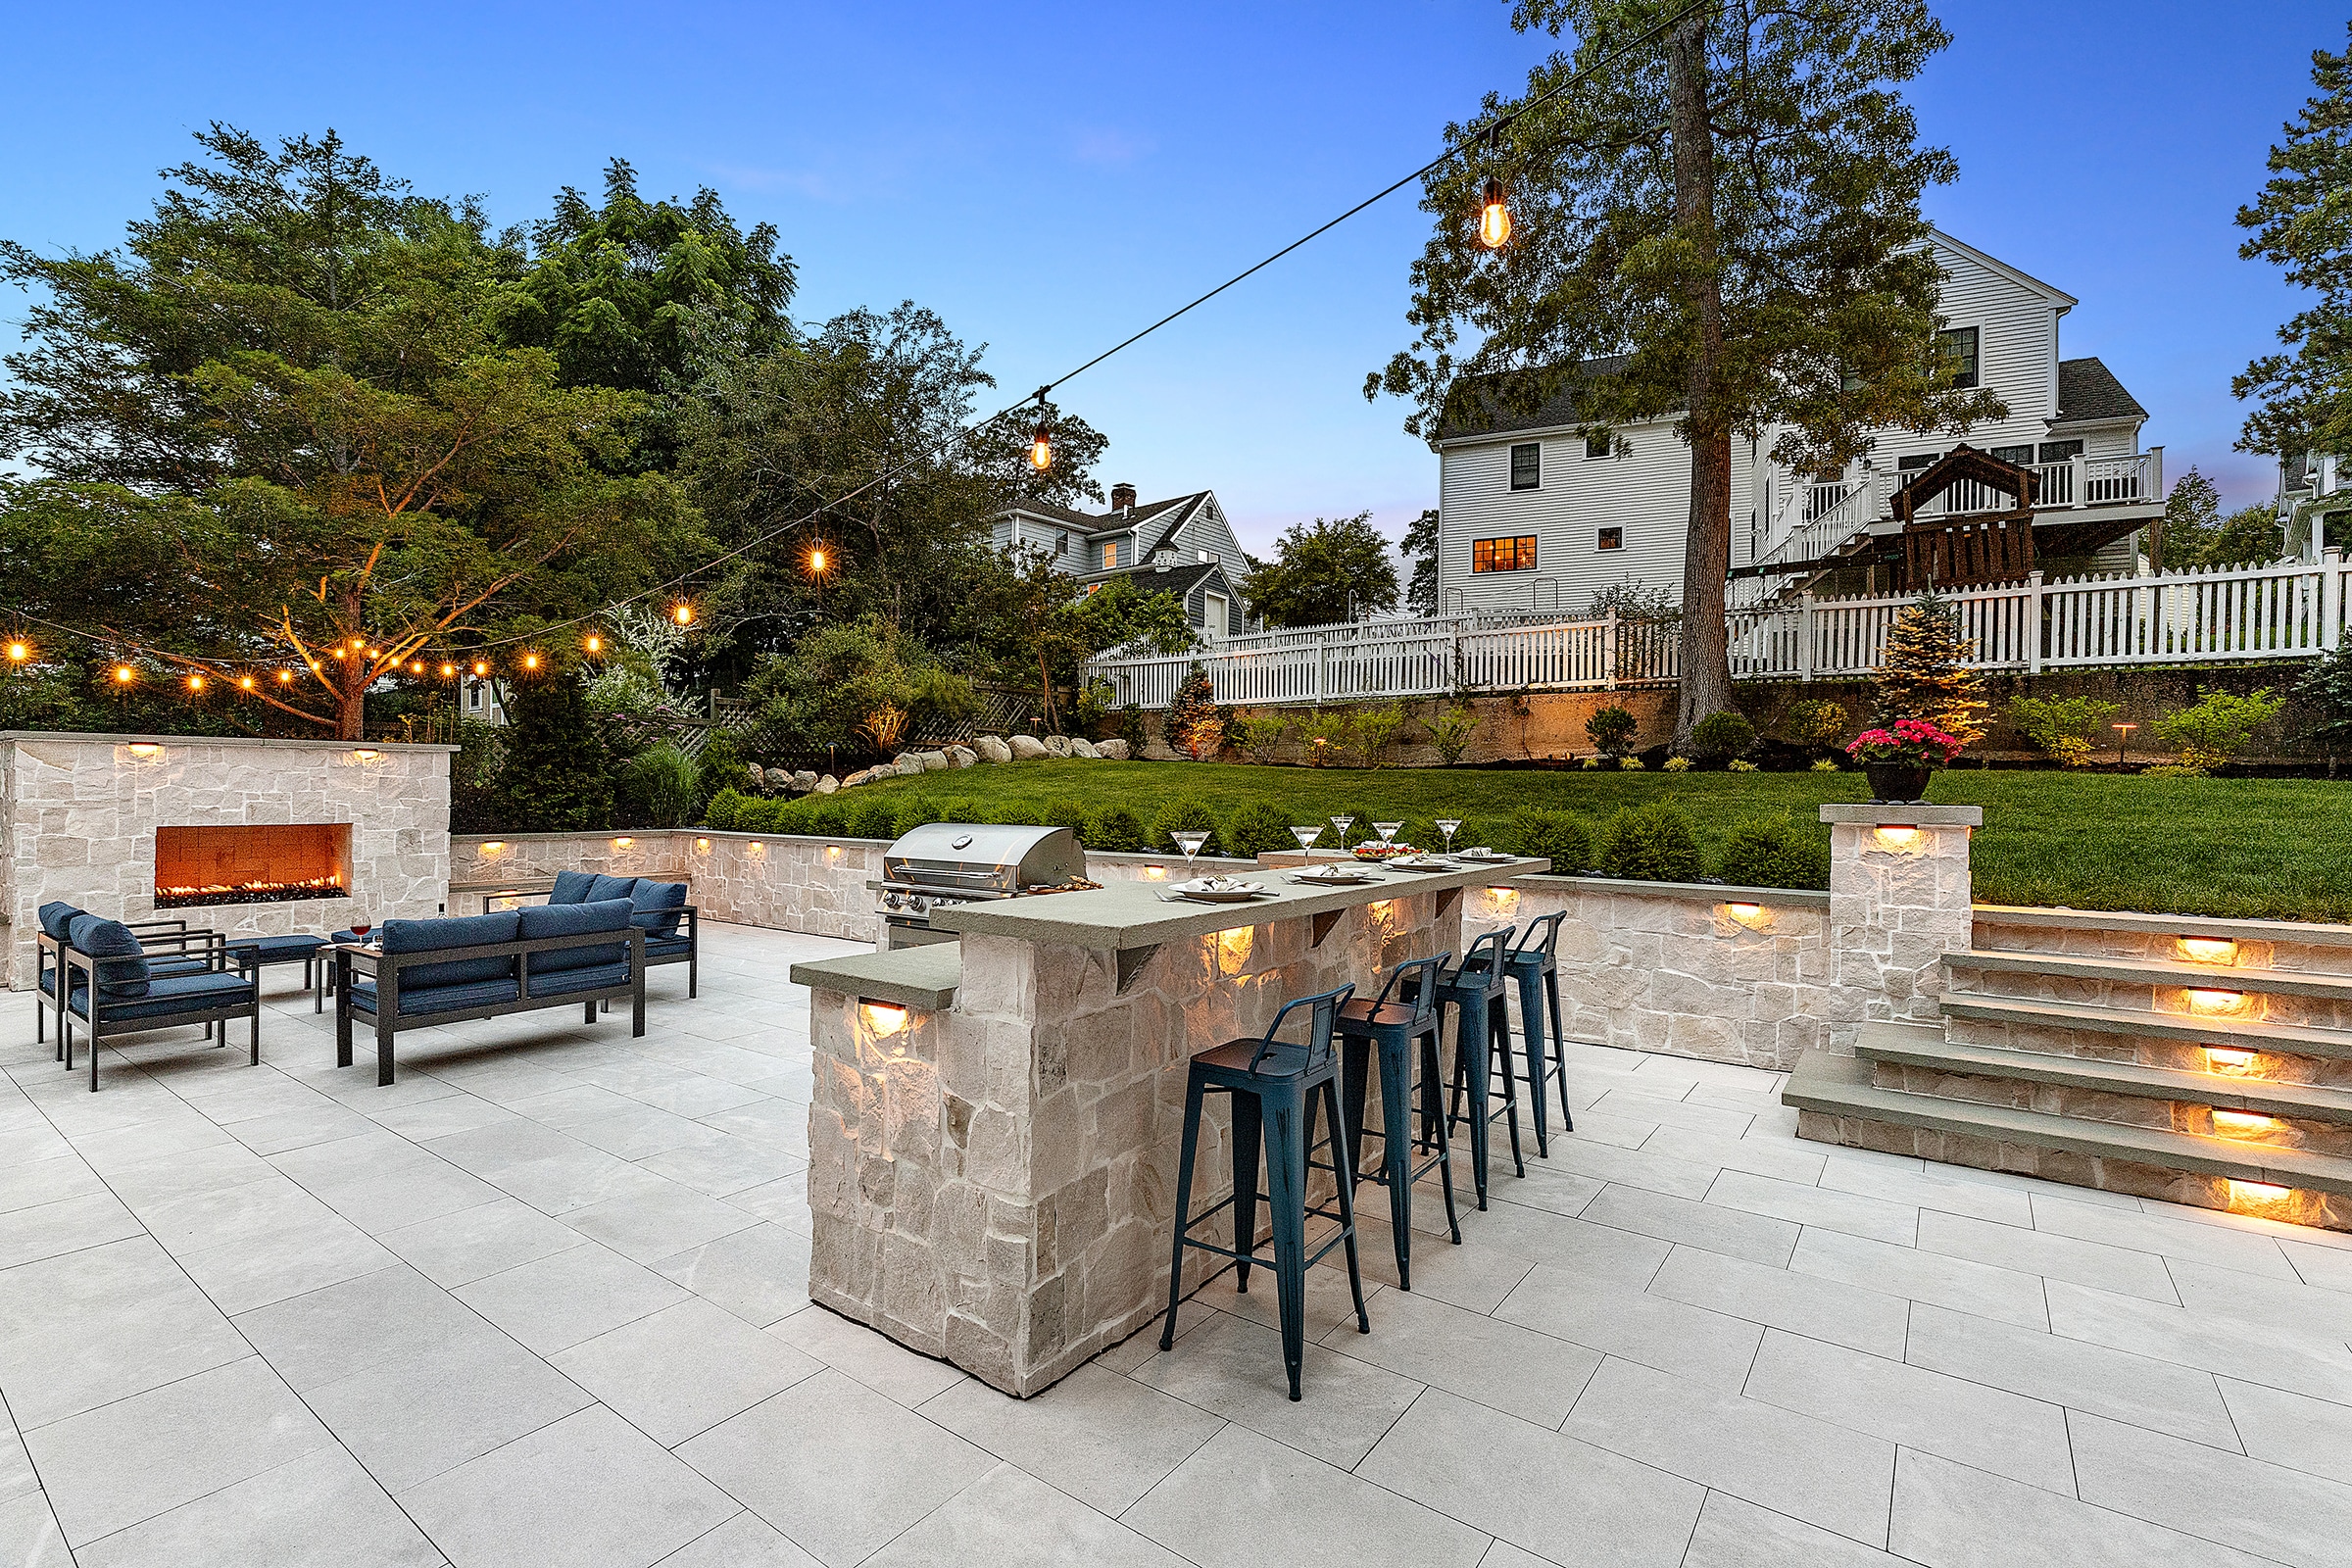 Backyard patio in Needham, Massachusetts with gas fireplace, outdoor kitchen, and stone stairs with outdoor lighting.